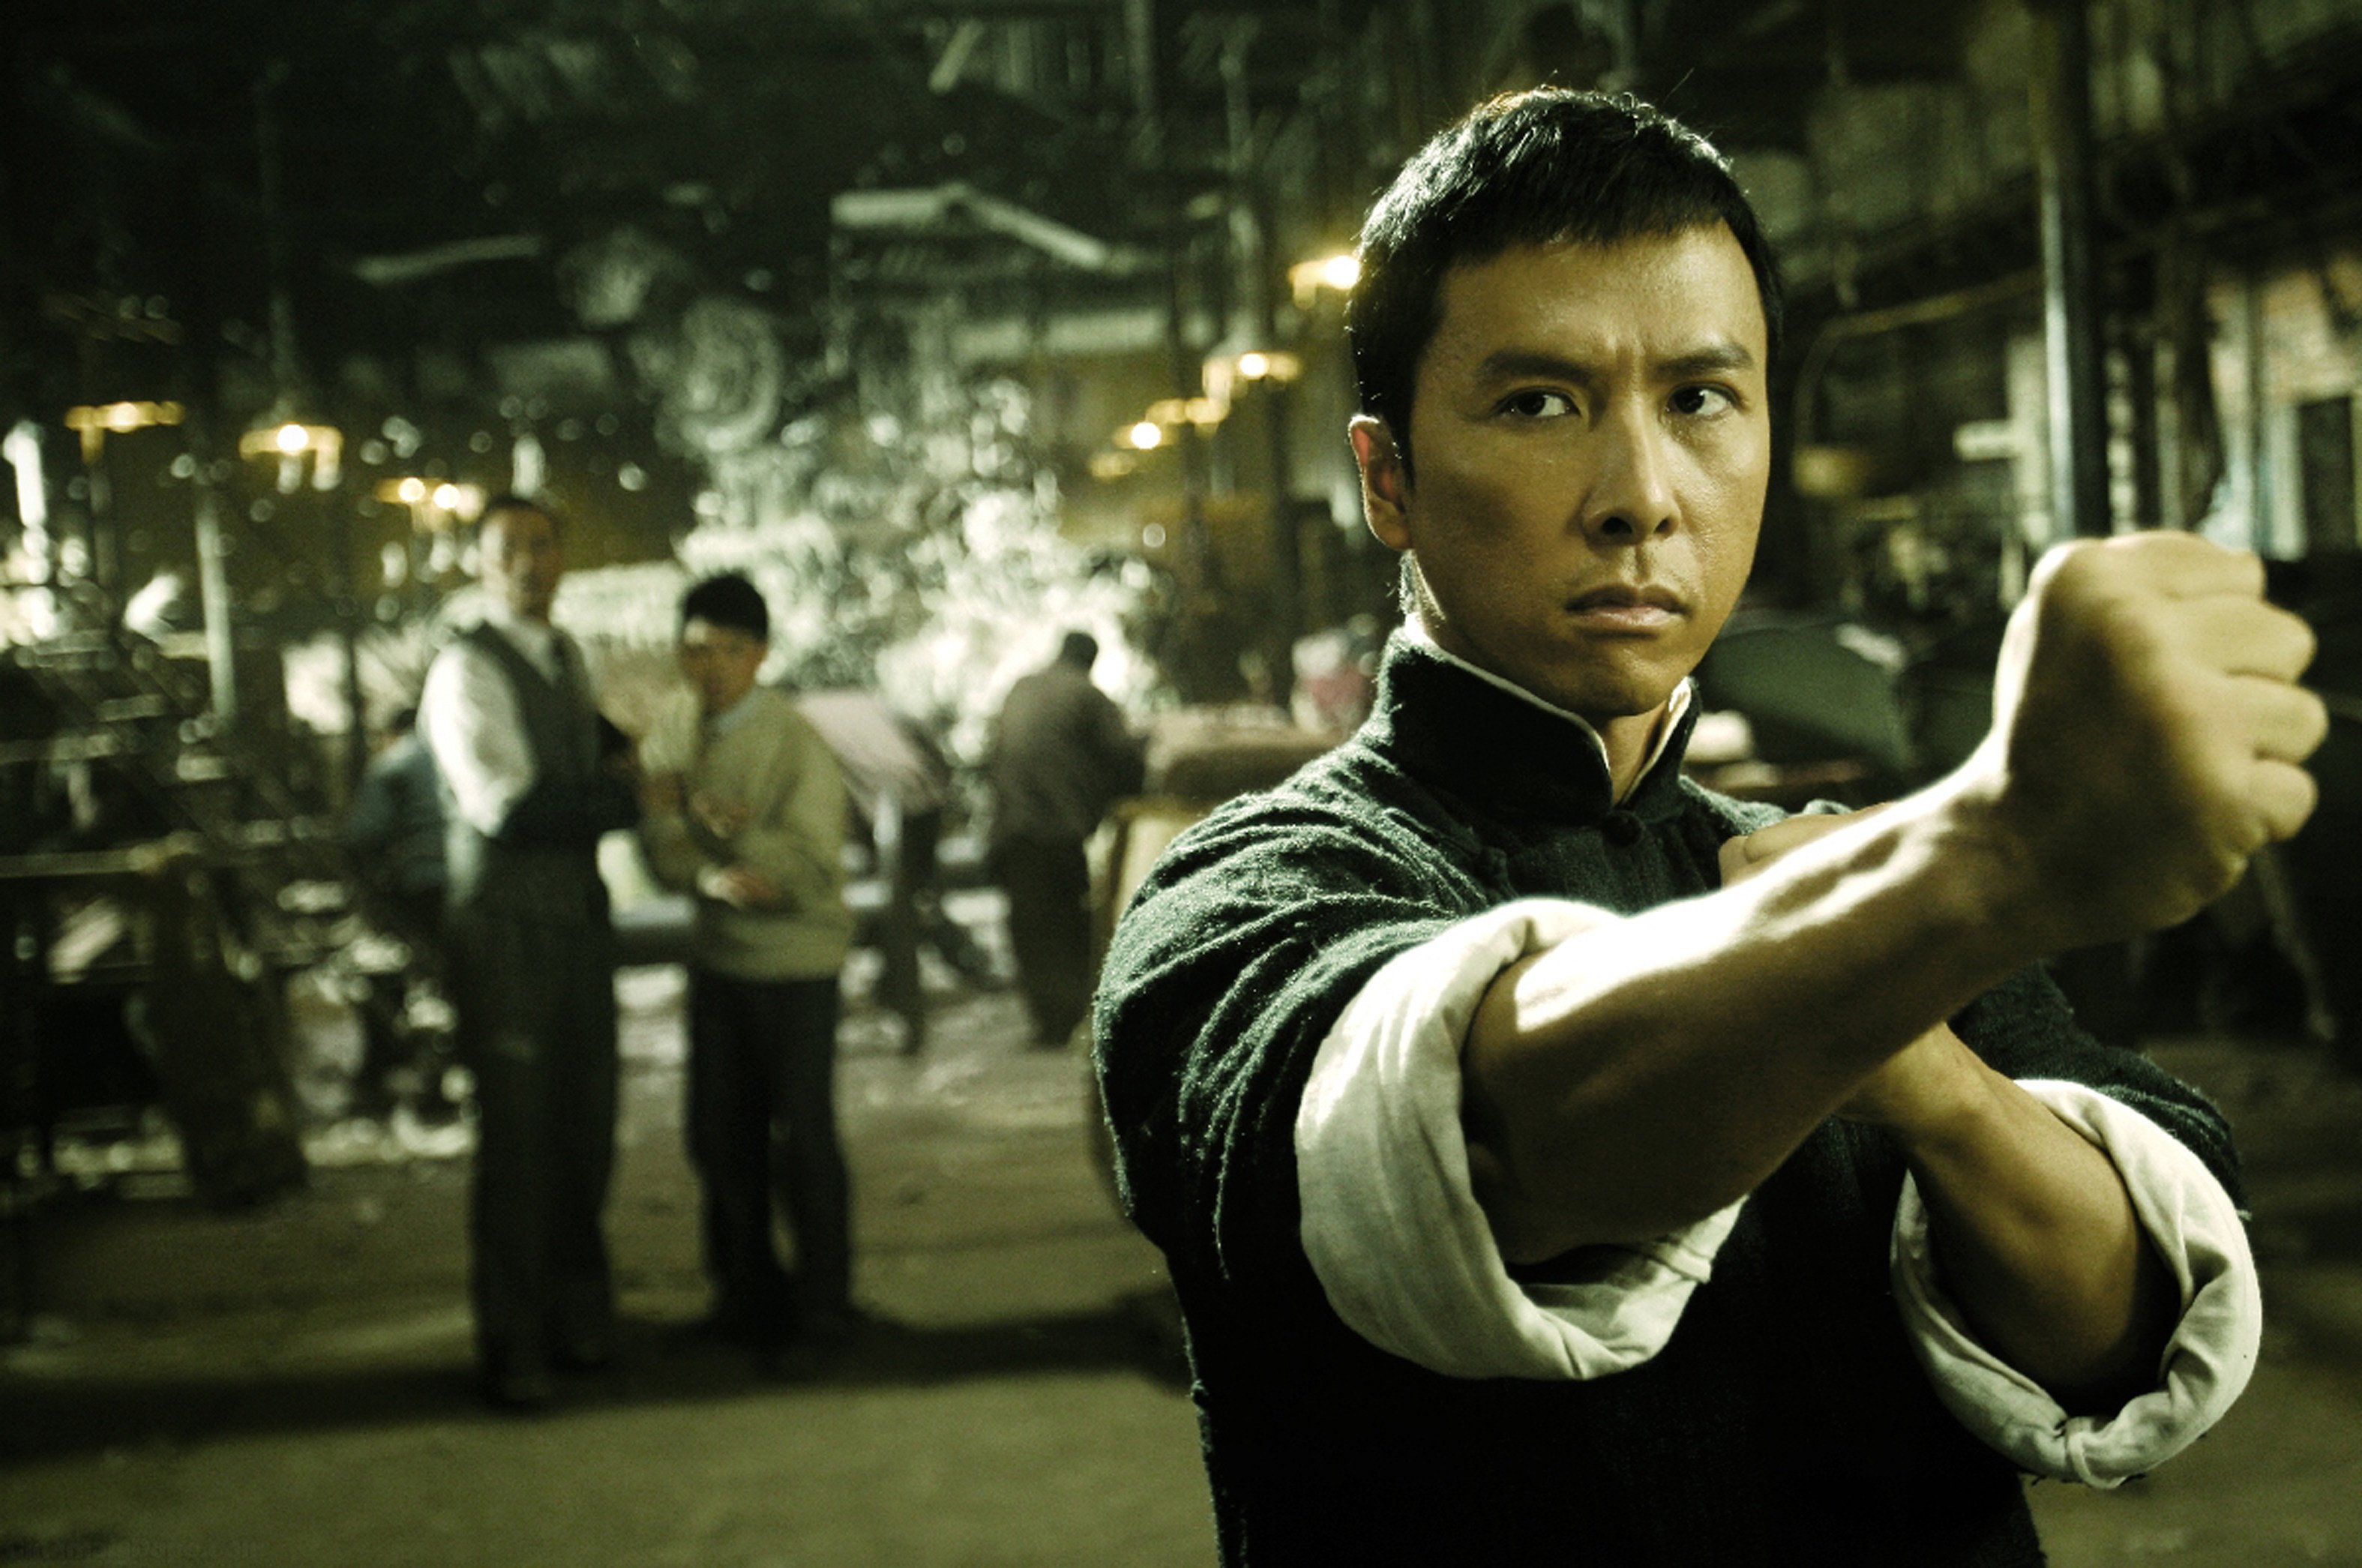 KILL ZONE 2 Official Trailer, Action Martial Arts Film